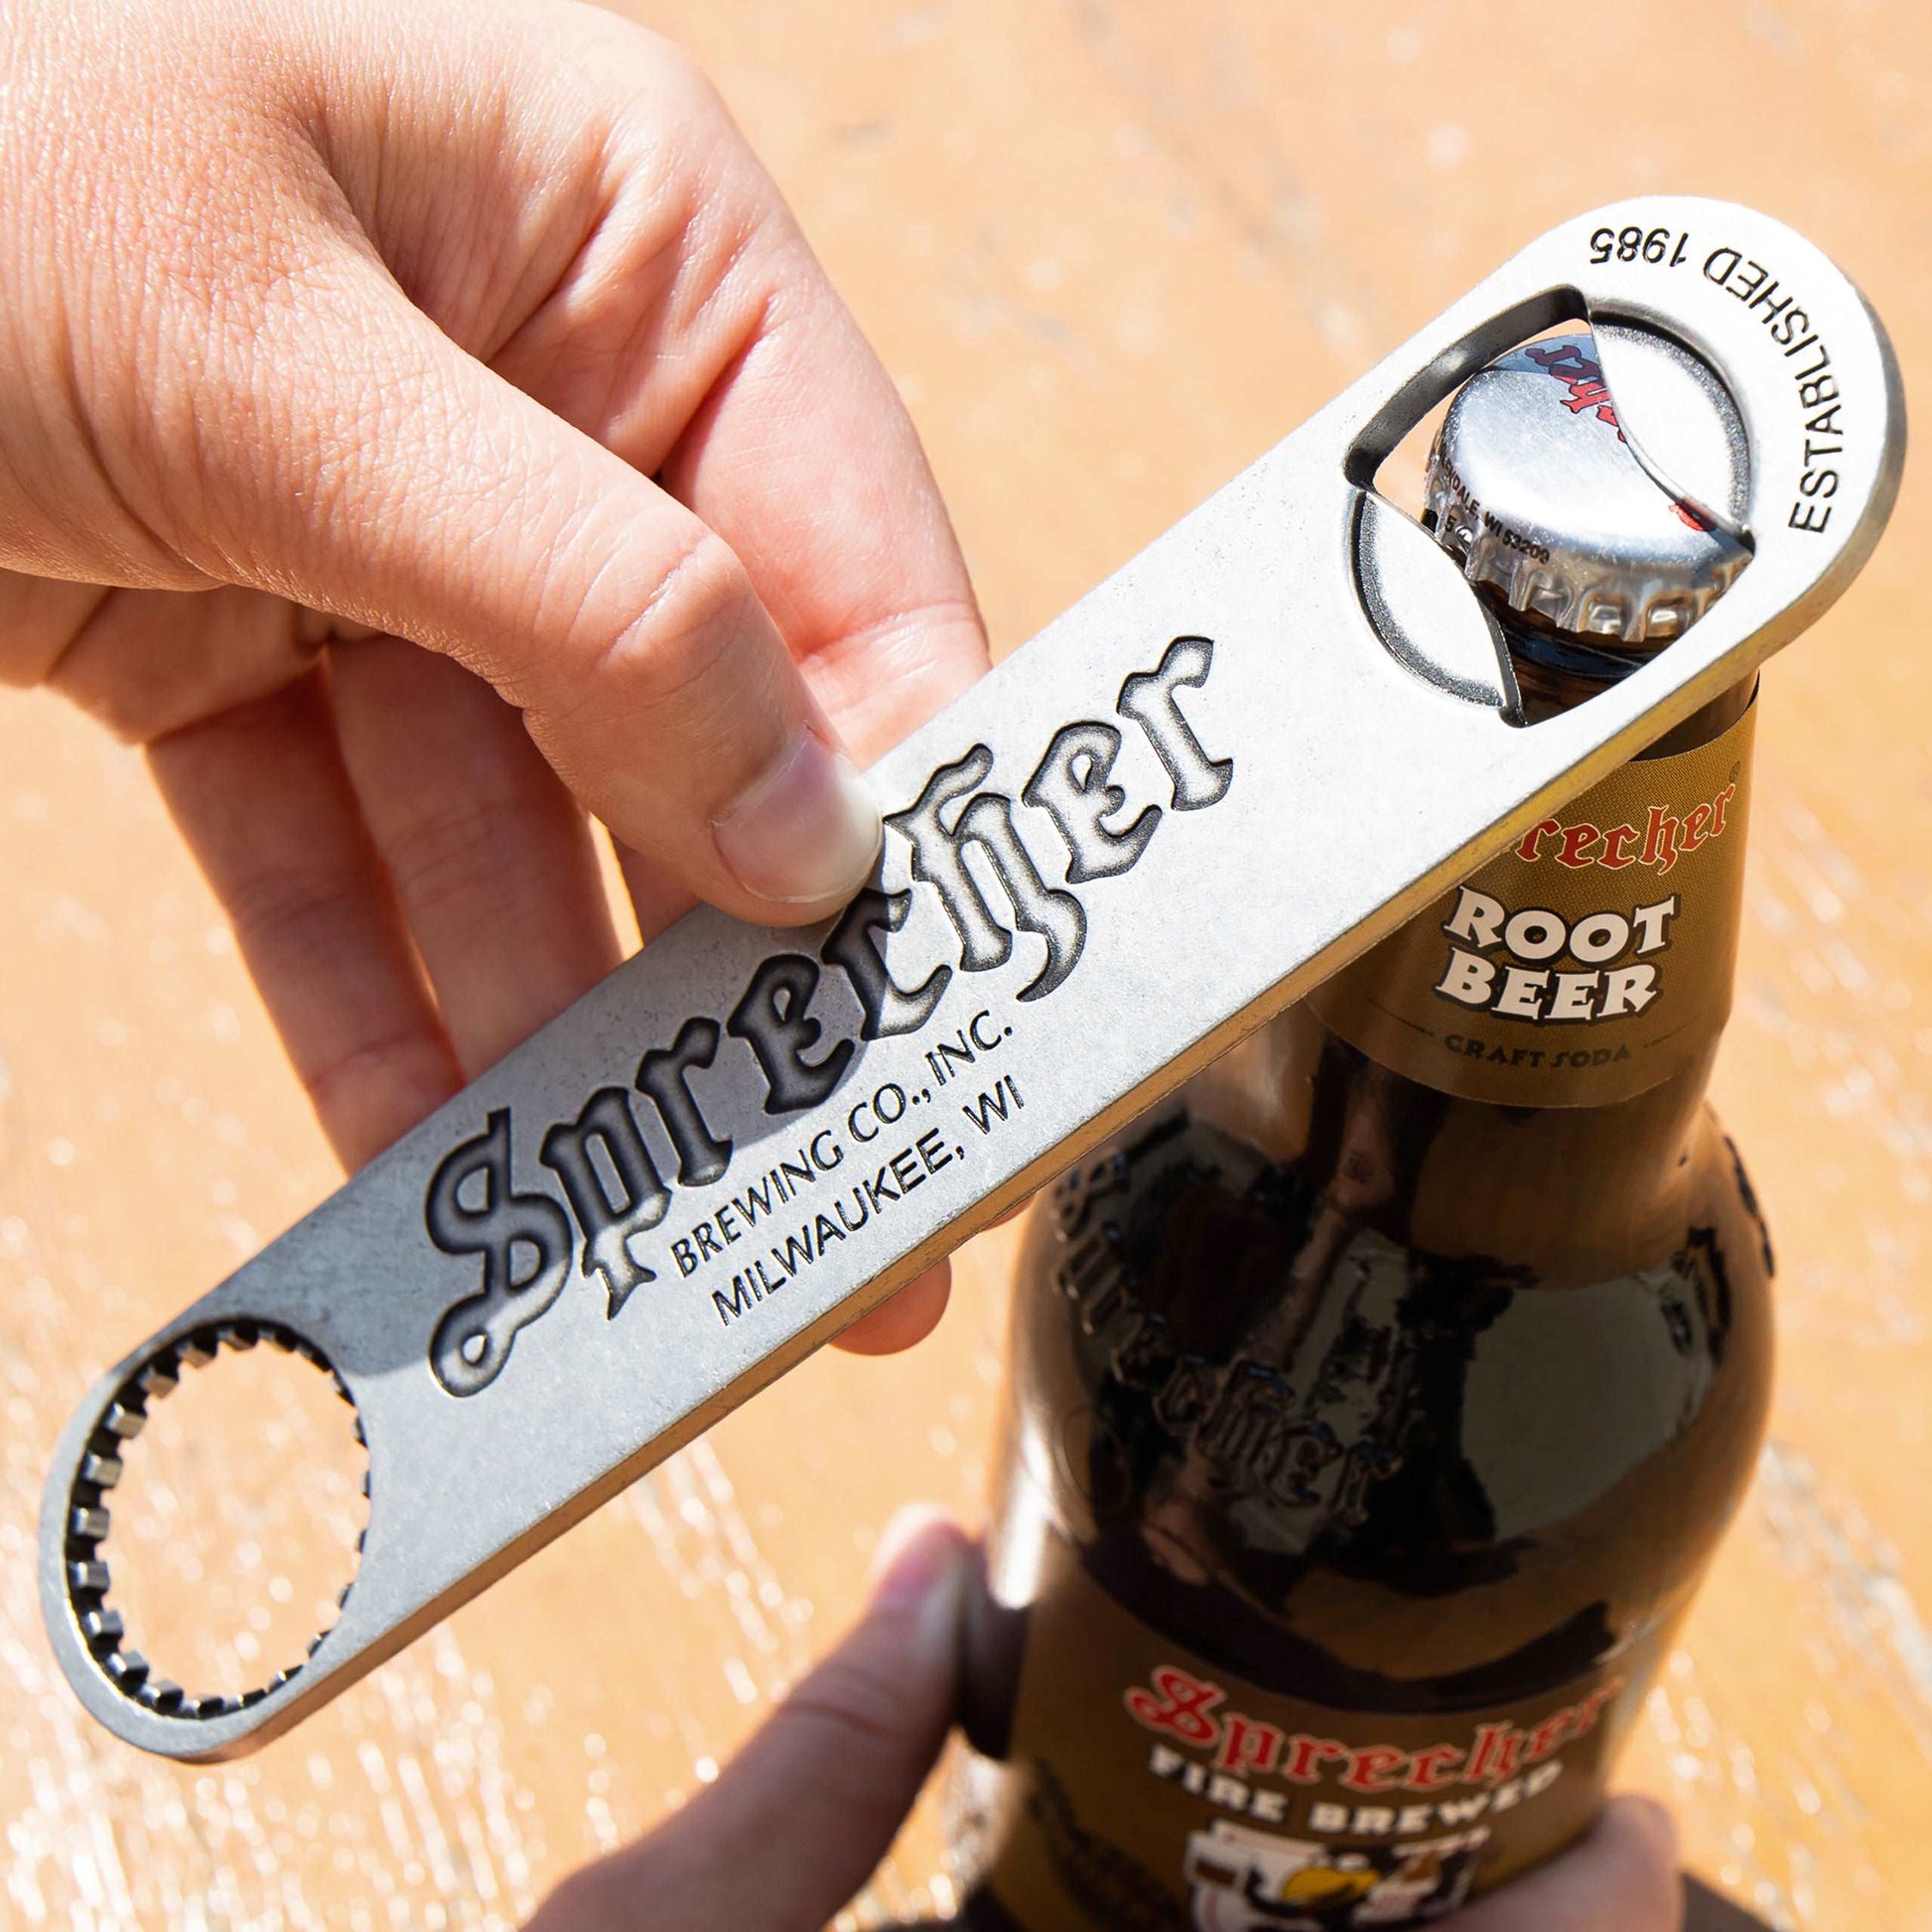 What Makes a Good Bottle Opener? - The New York Times